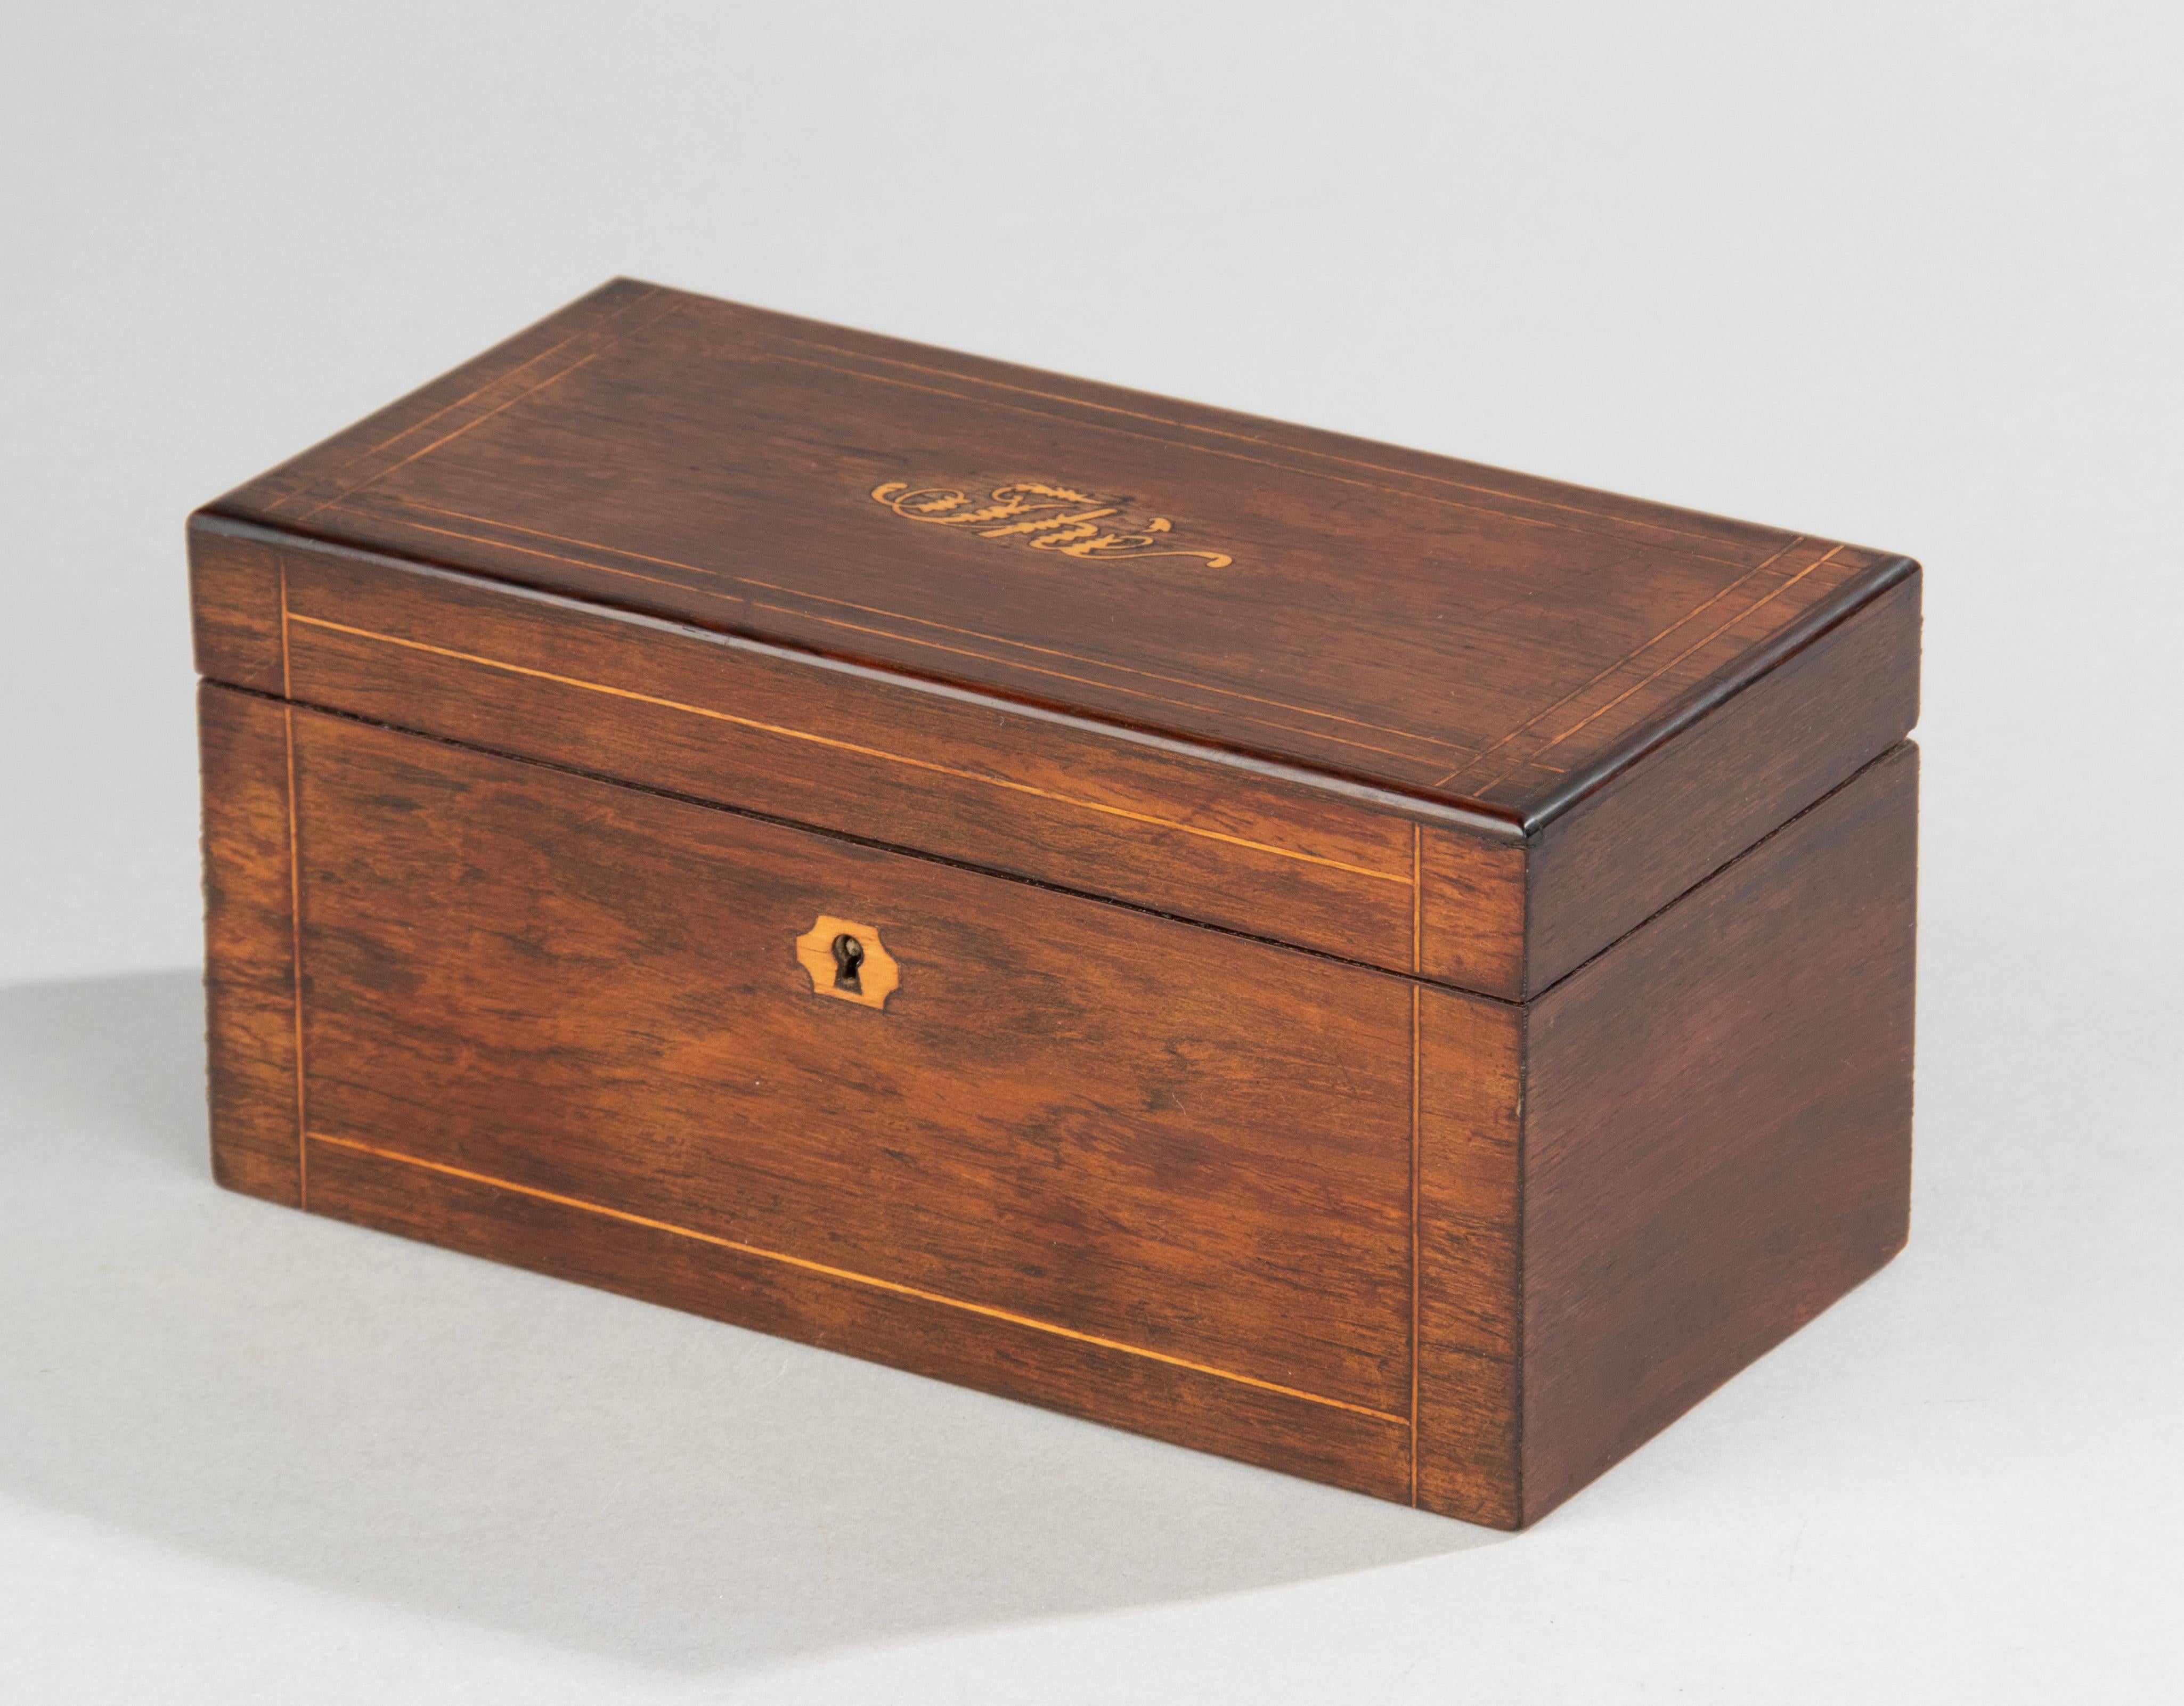 An antique French tea caddy in Napoleon III style. The box is made of veneer beechwood, with beautiful grain. The lid is in slayed with lighter maple wood. At the center wood inlanders of Thé (French for Tea). Inside two compartments made of